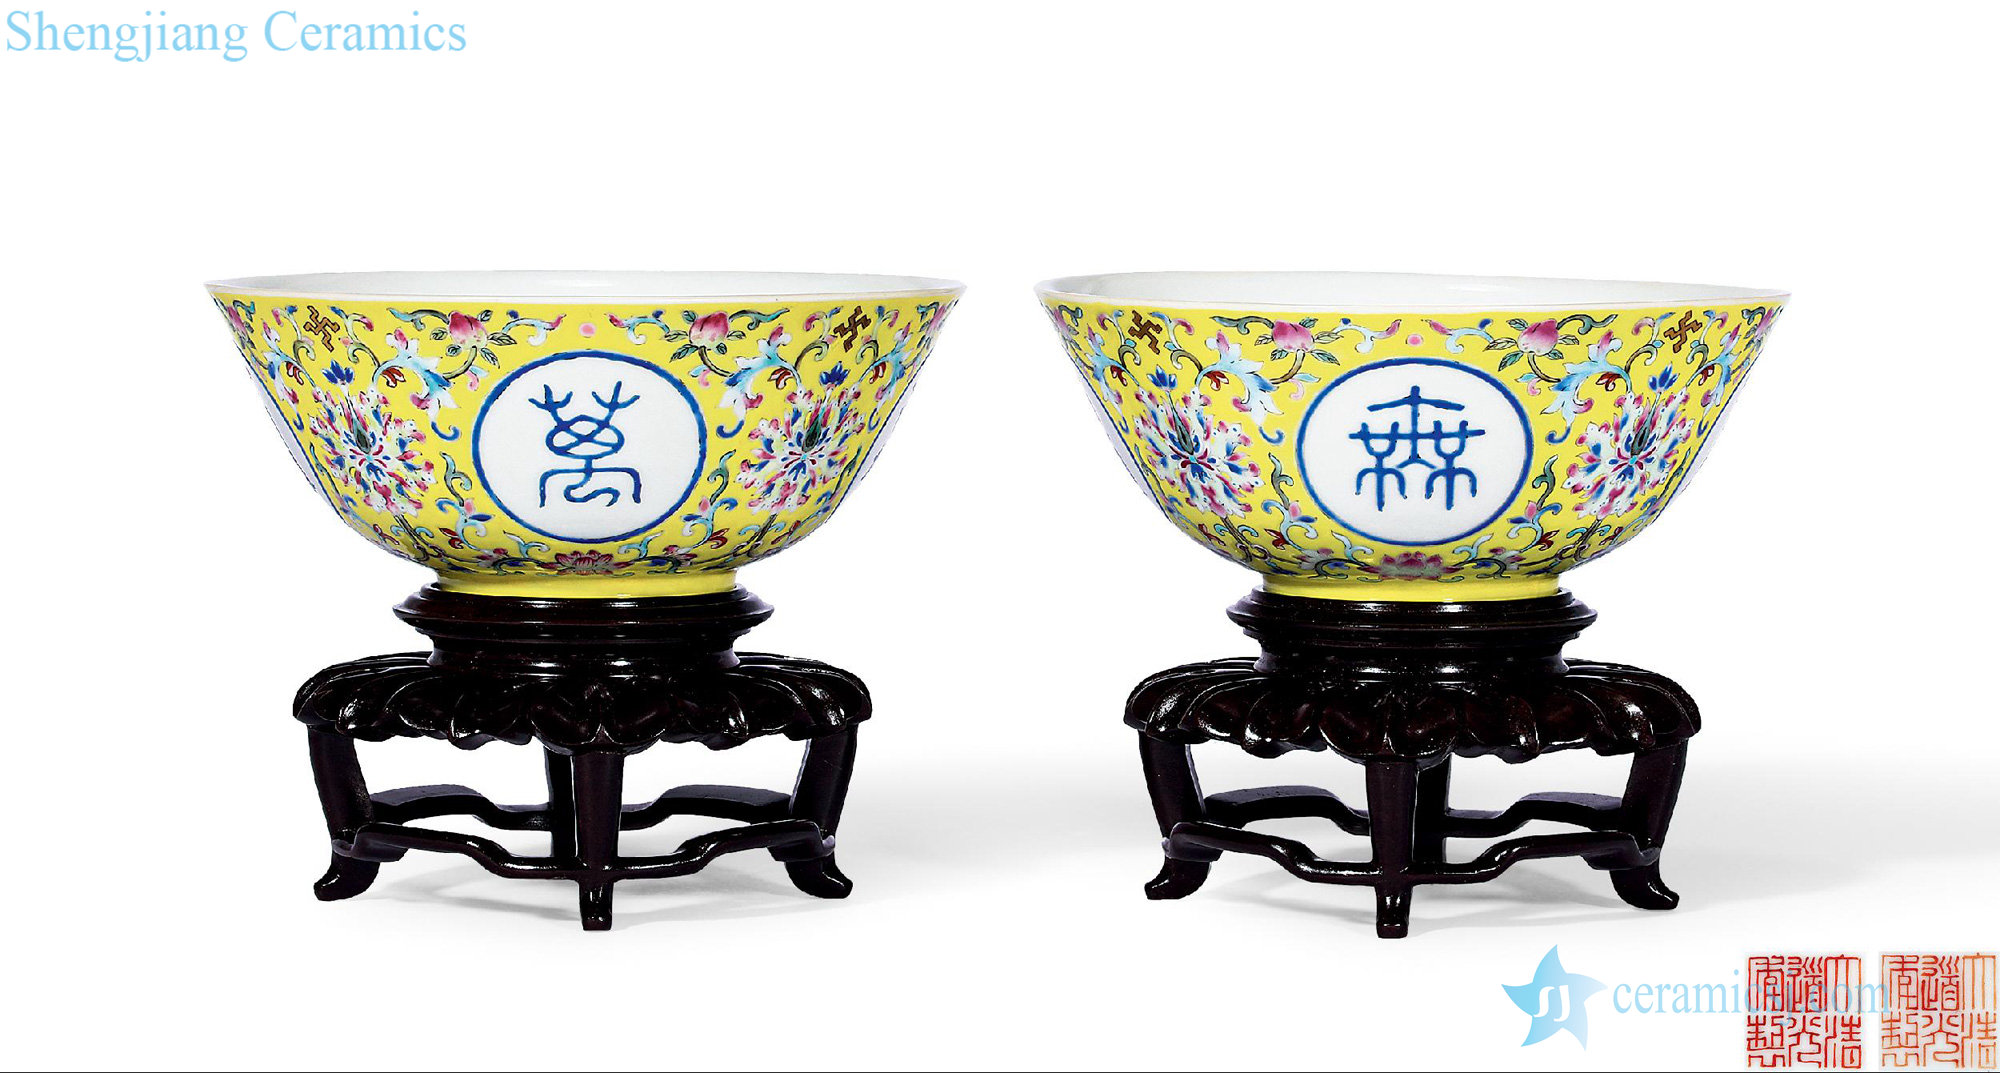 Qing daoguang Yellow to enamel stays in bowl (a)